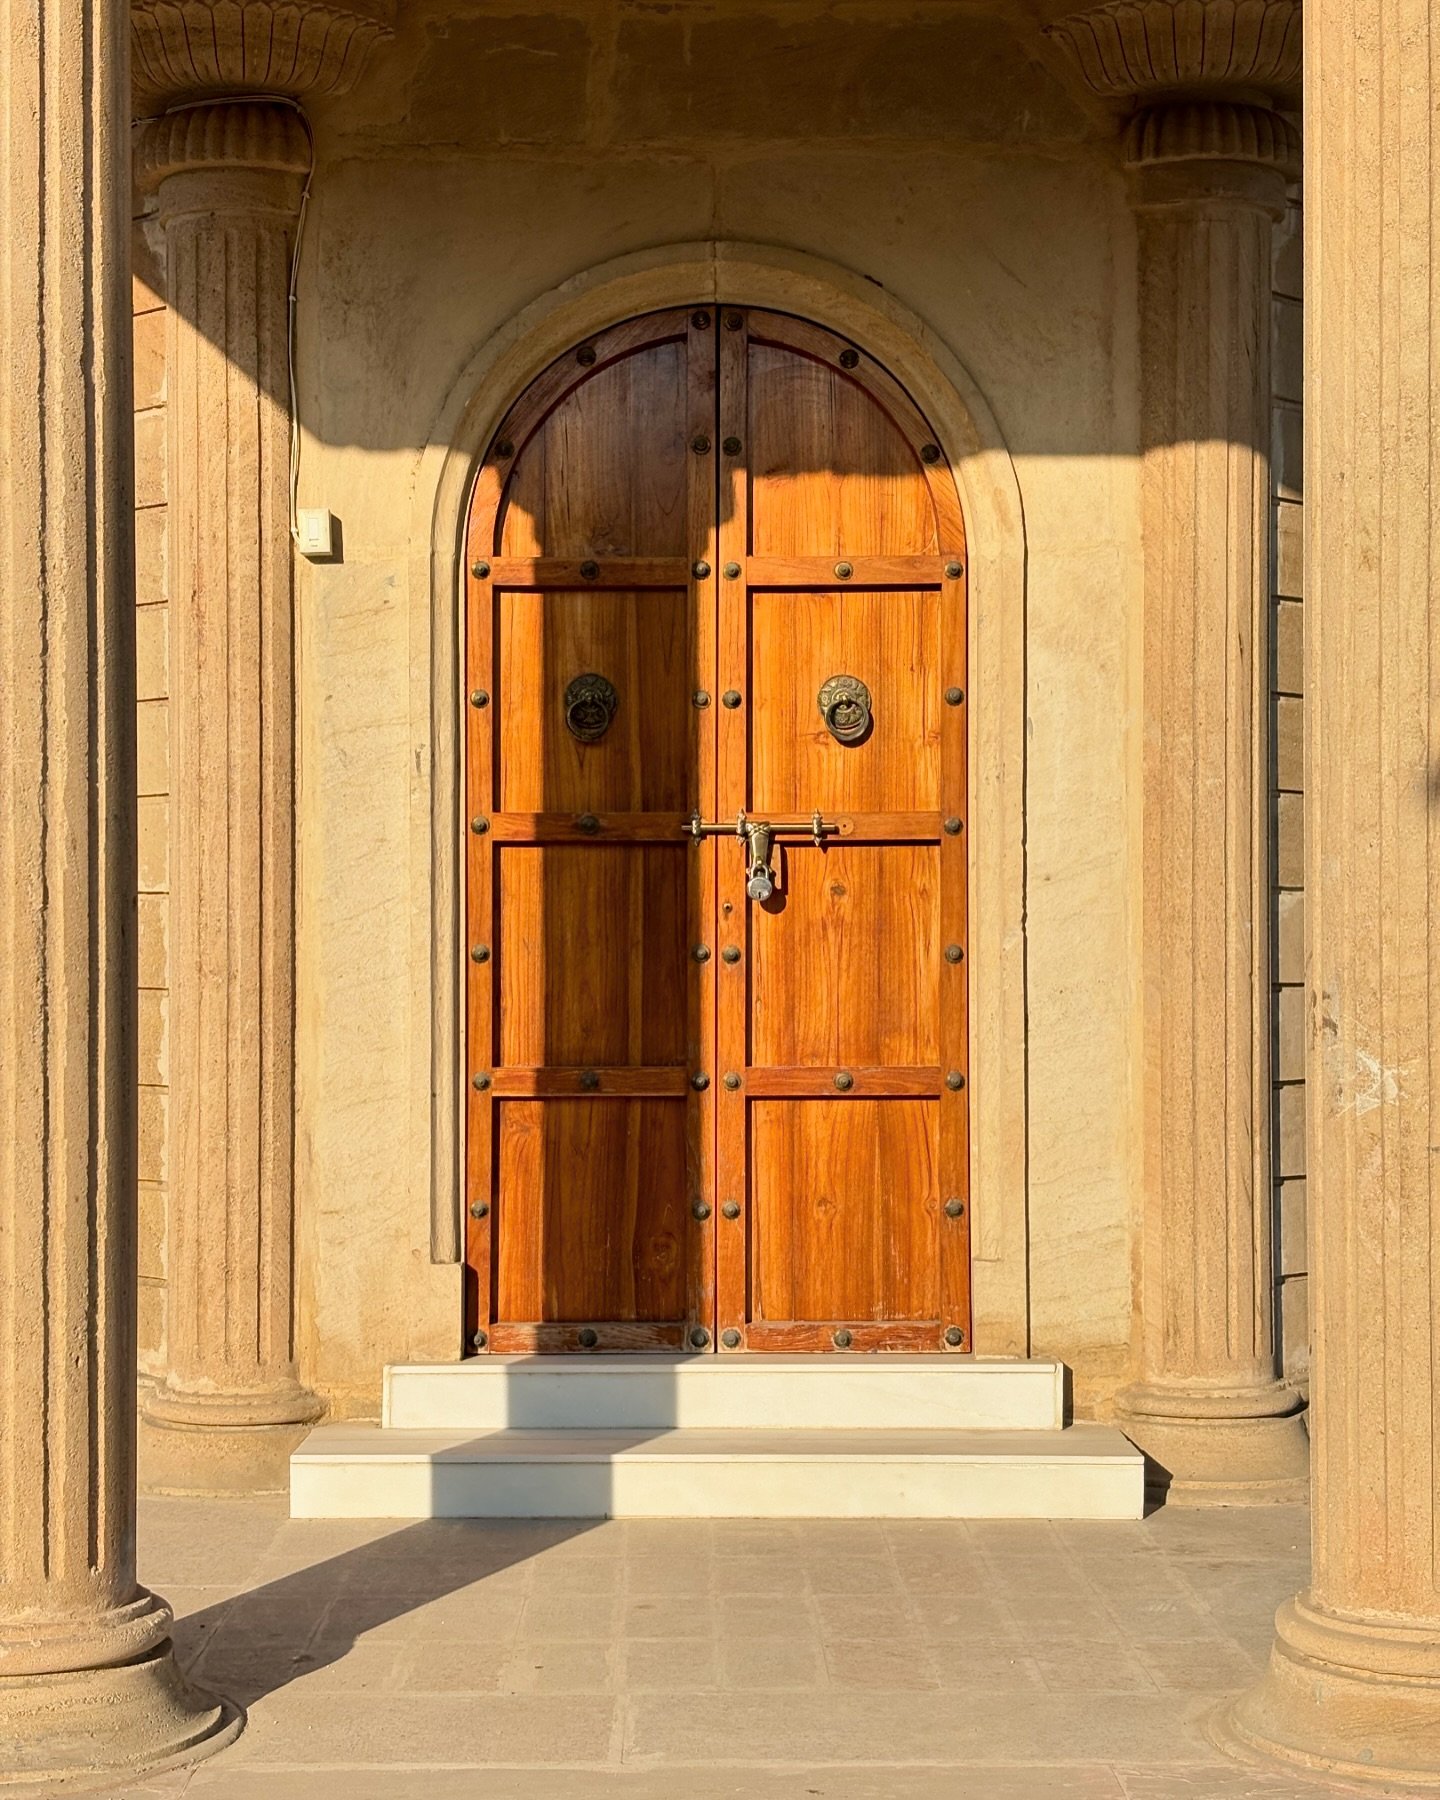 These handcrafted solid wood doors, designed 4 years ago are weathering beautifully. ✨
Recreated an antique door design to fit the location and surrounding spaces. 
They include a set of concealed windows within the framework, for creating access for